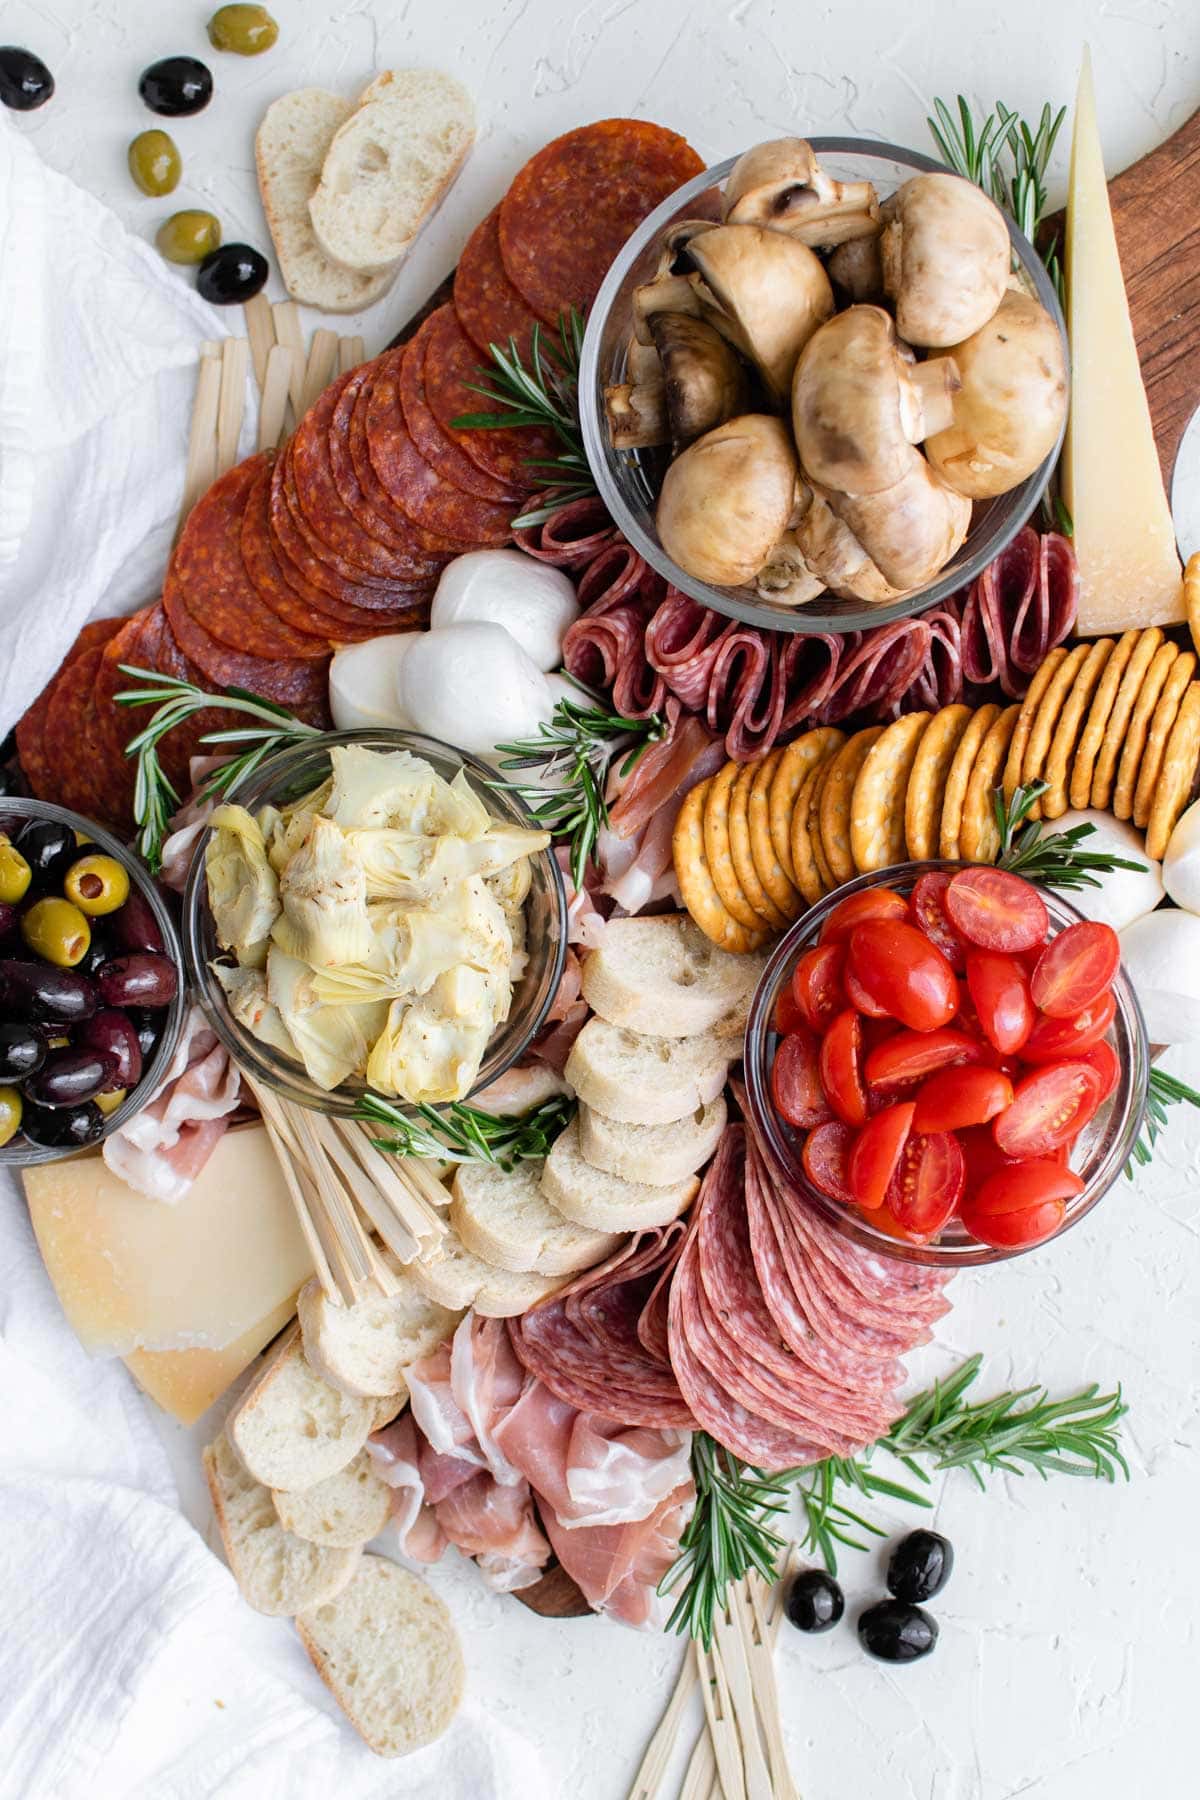 How to Epic Antipasto Platter Assemble an